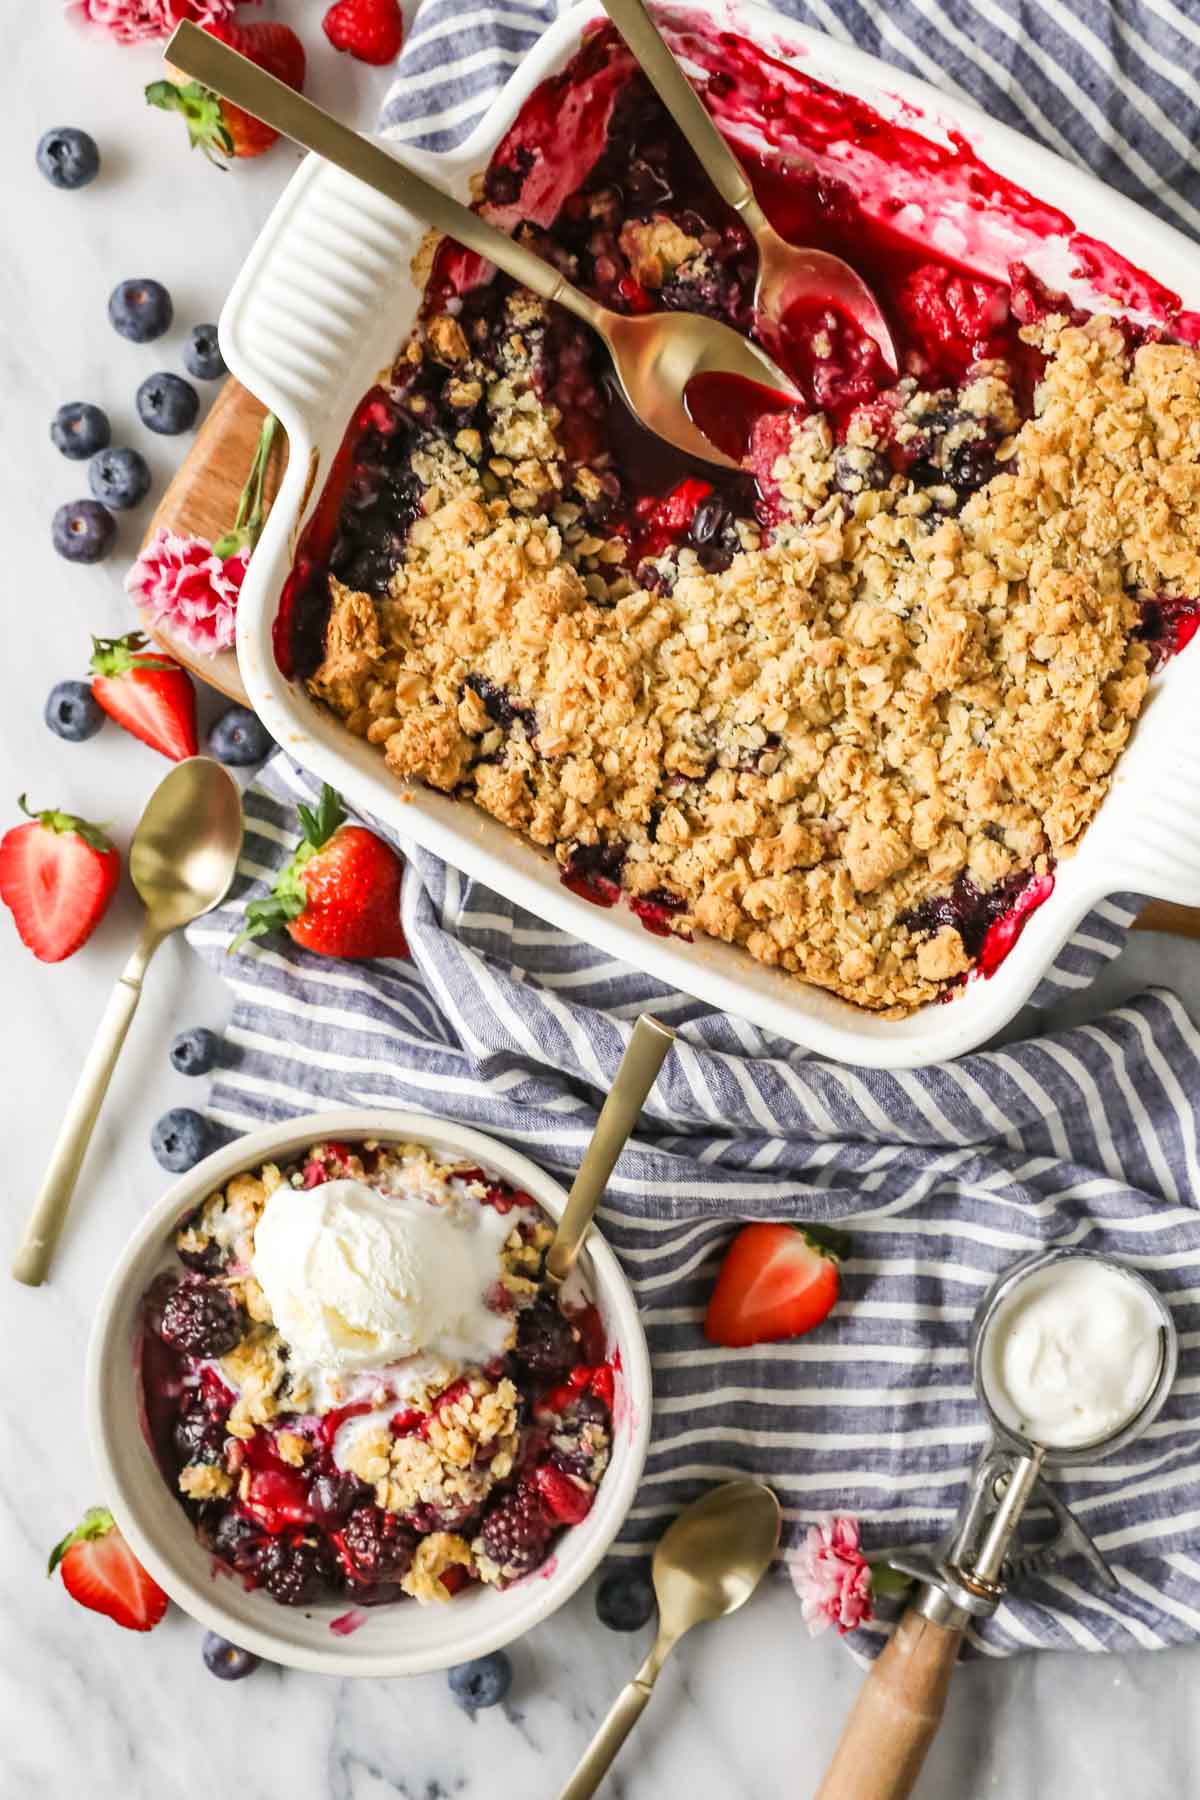 Overhead view of a berry crisp in a baking dish with a single serving in a bowl beside it.